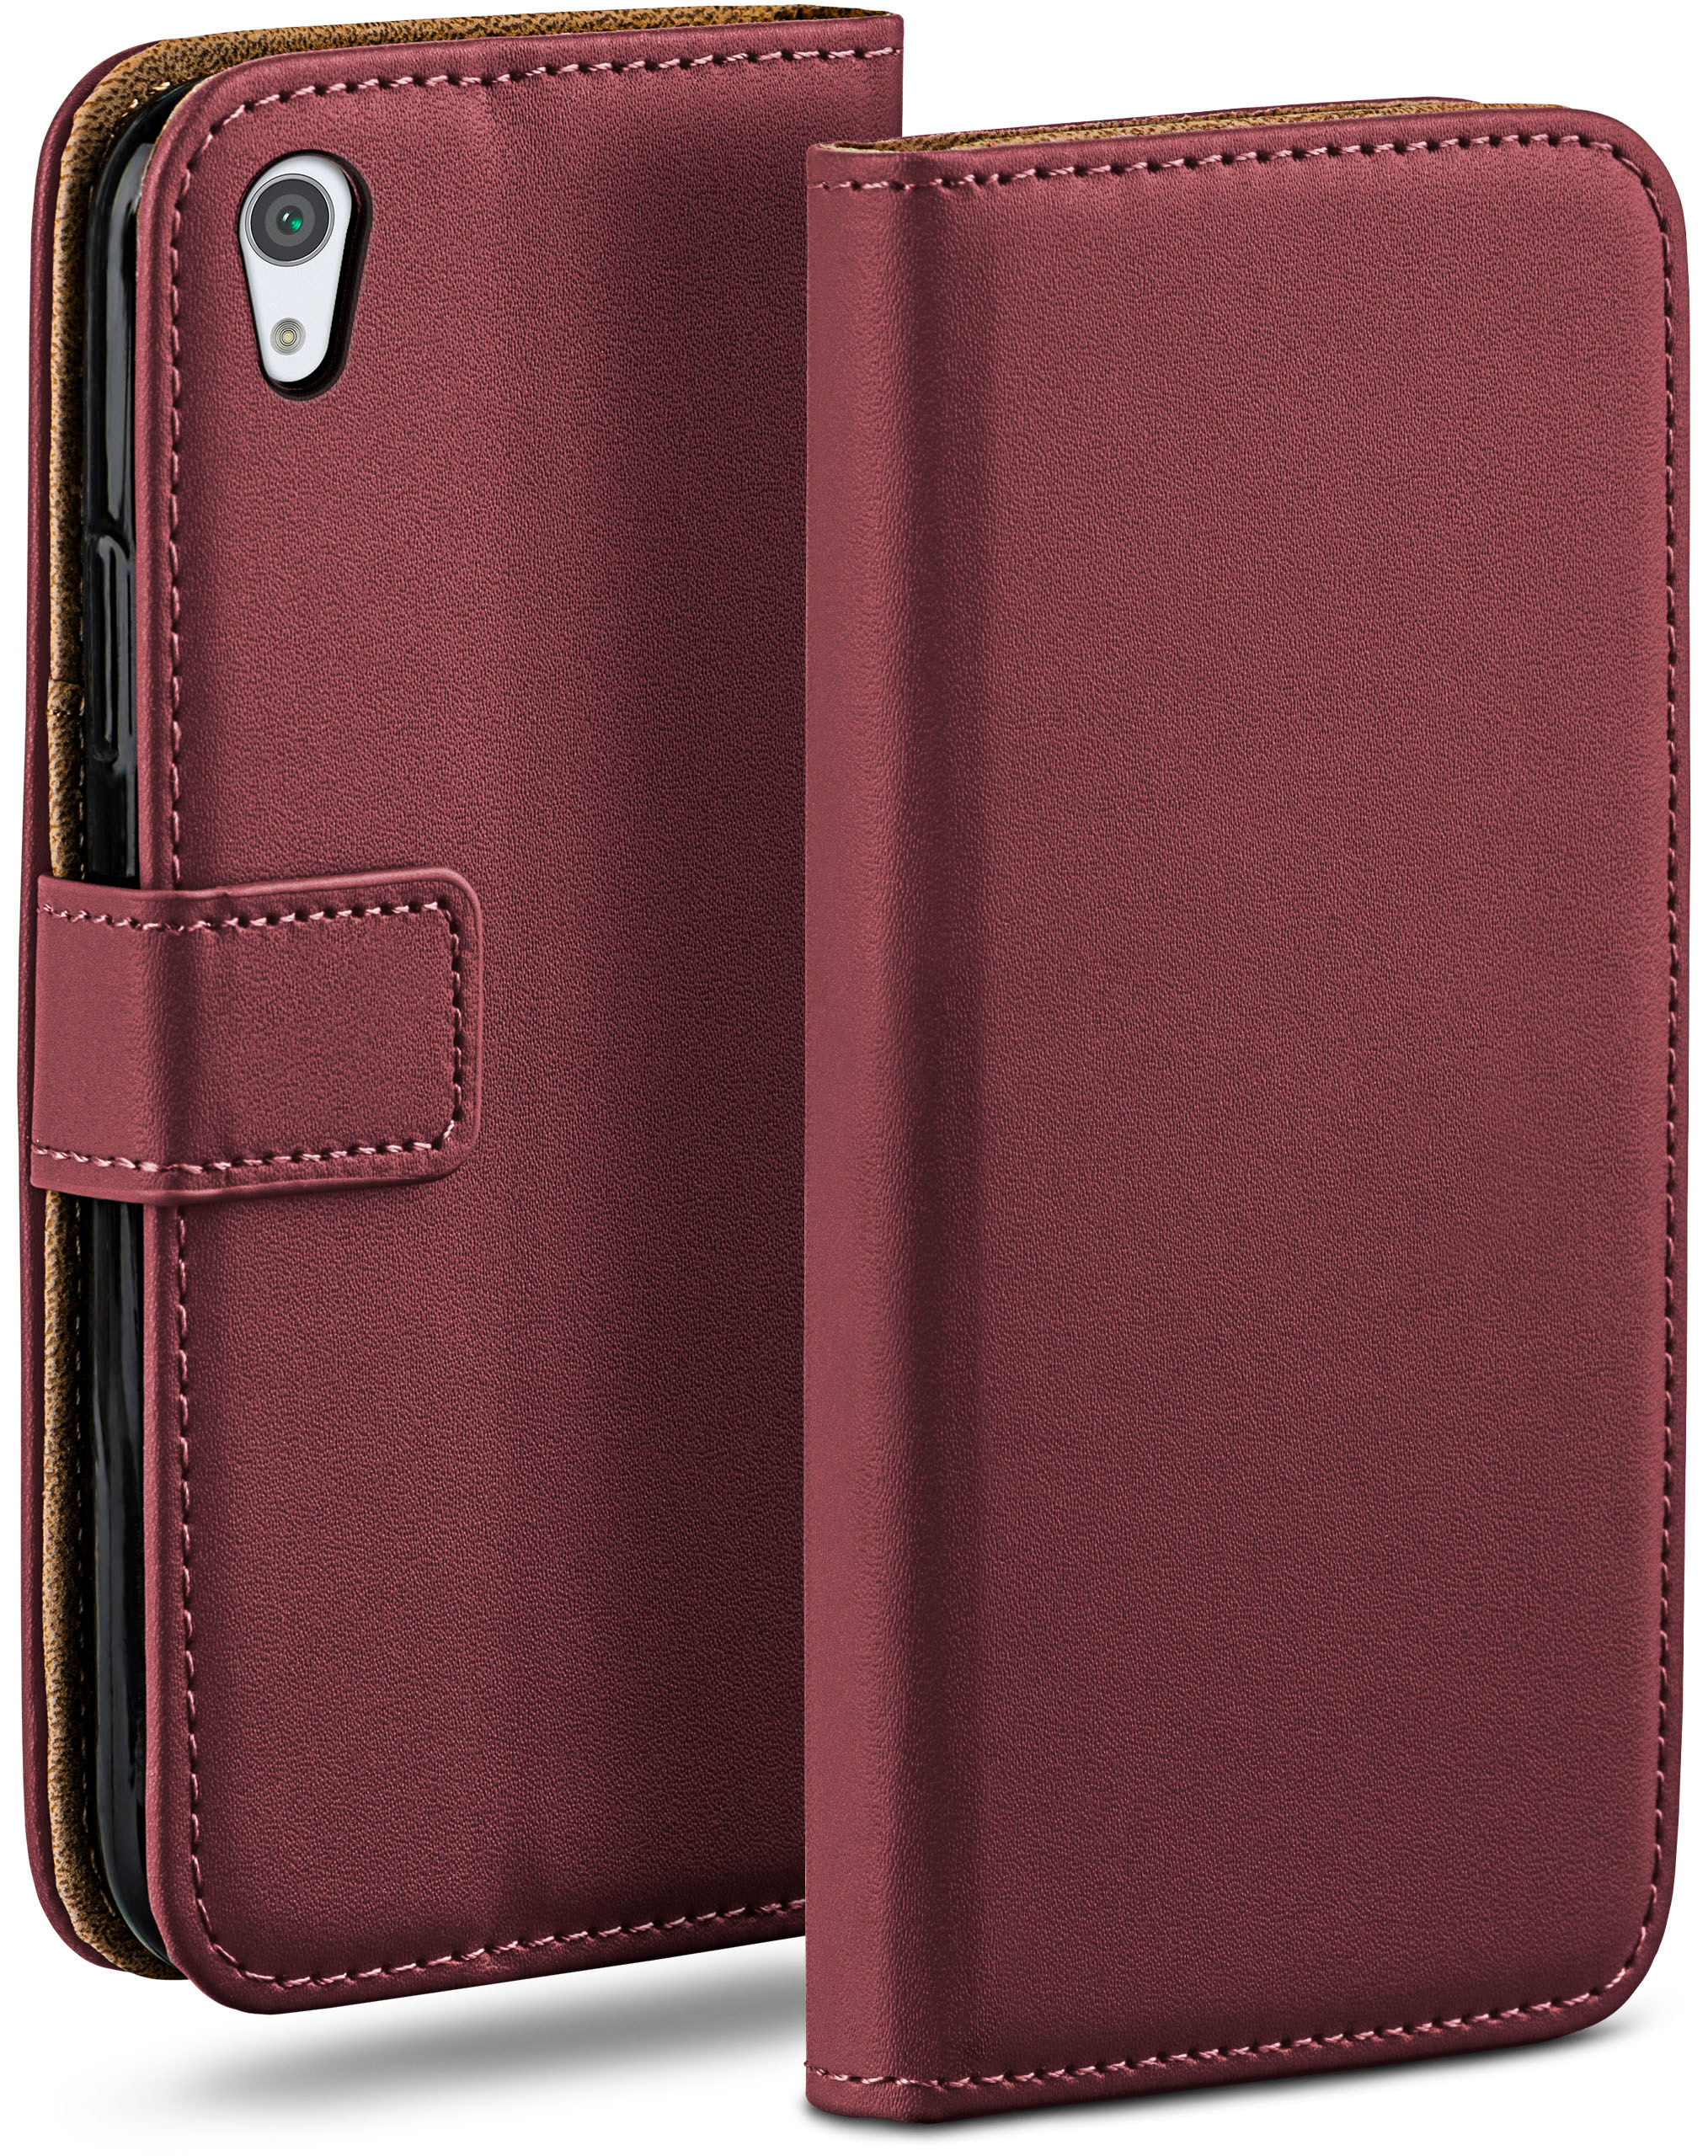 MOEX Book Sony, Bookcover, Maroon-Red Case, Xperia XA1